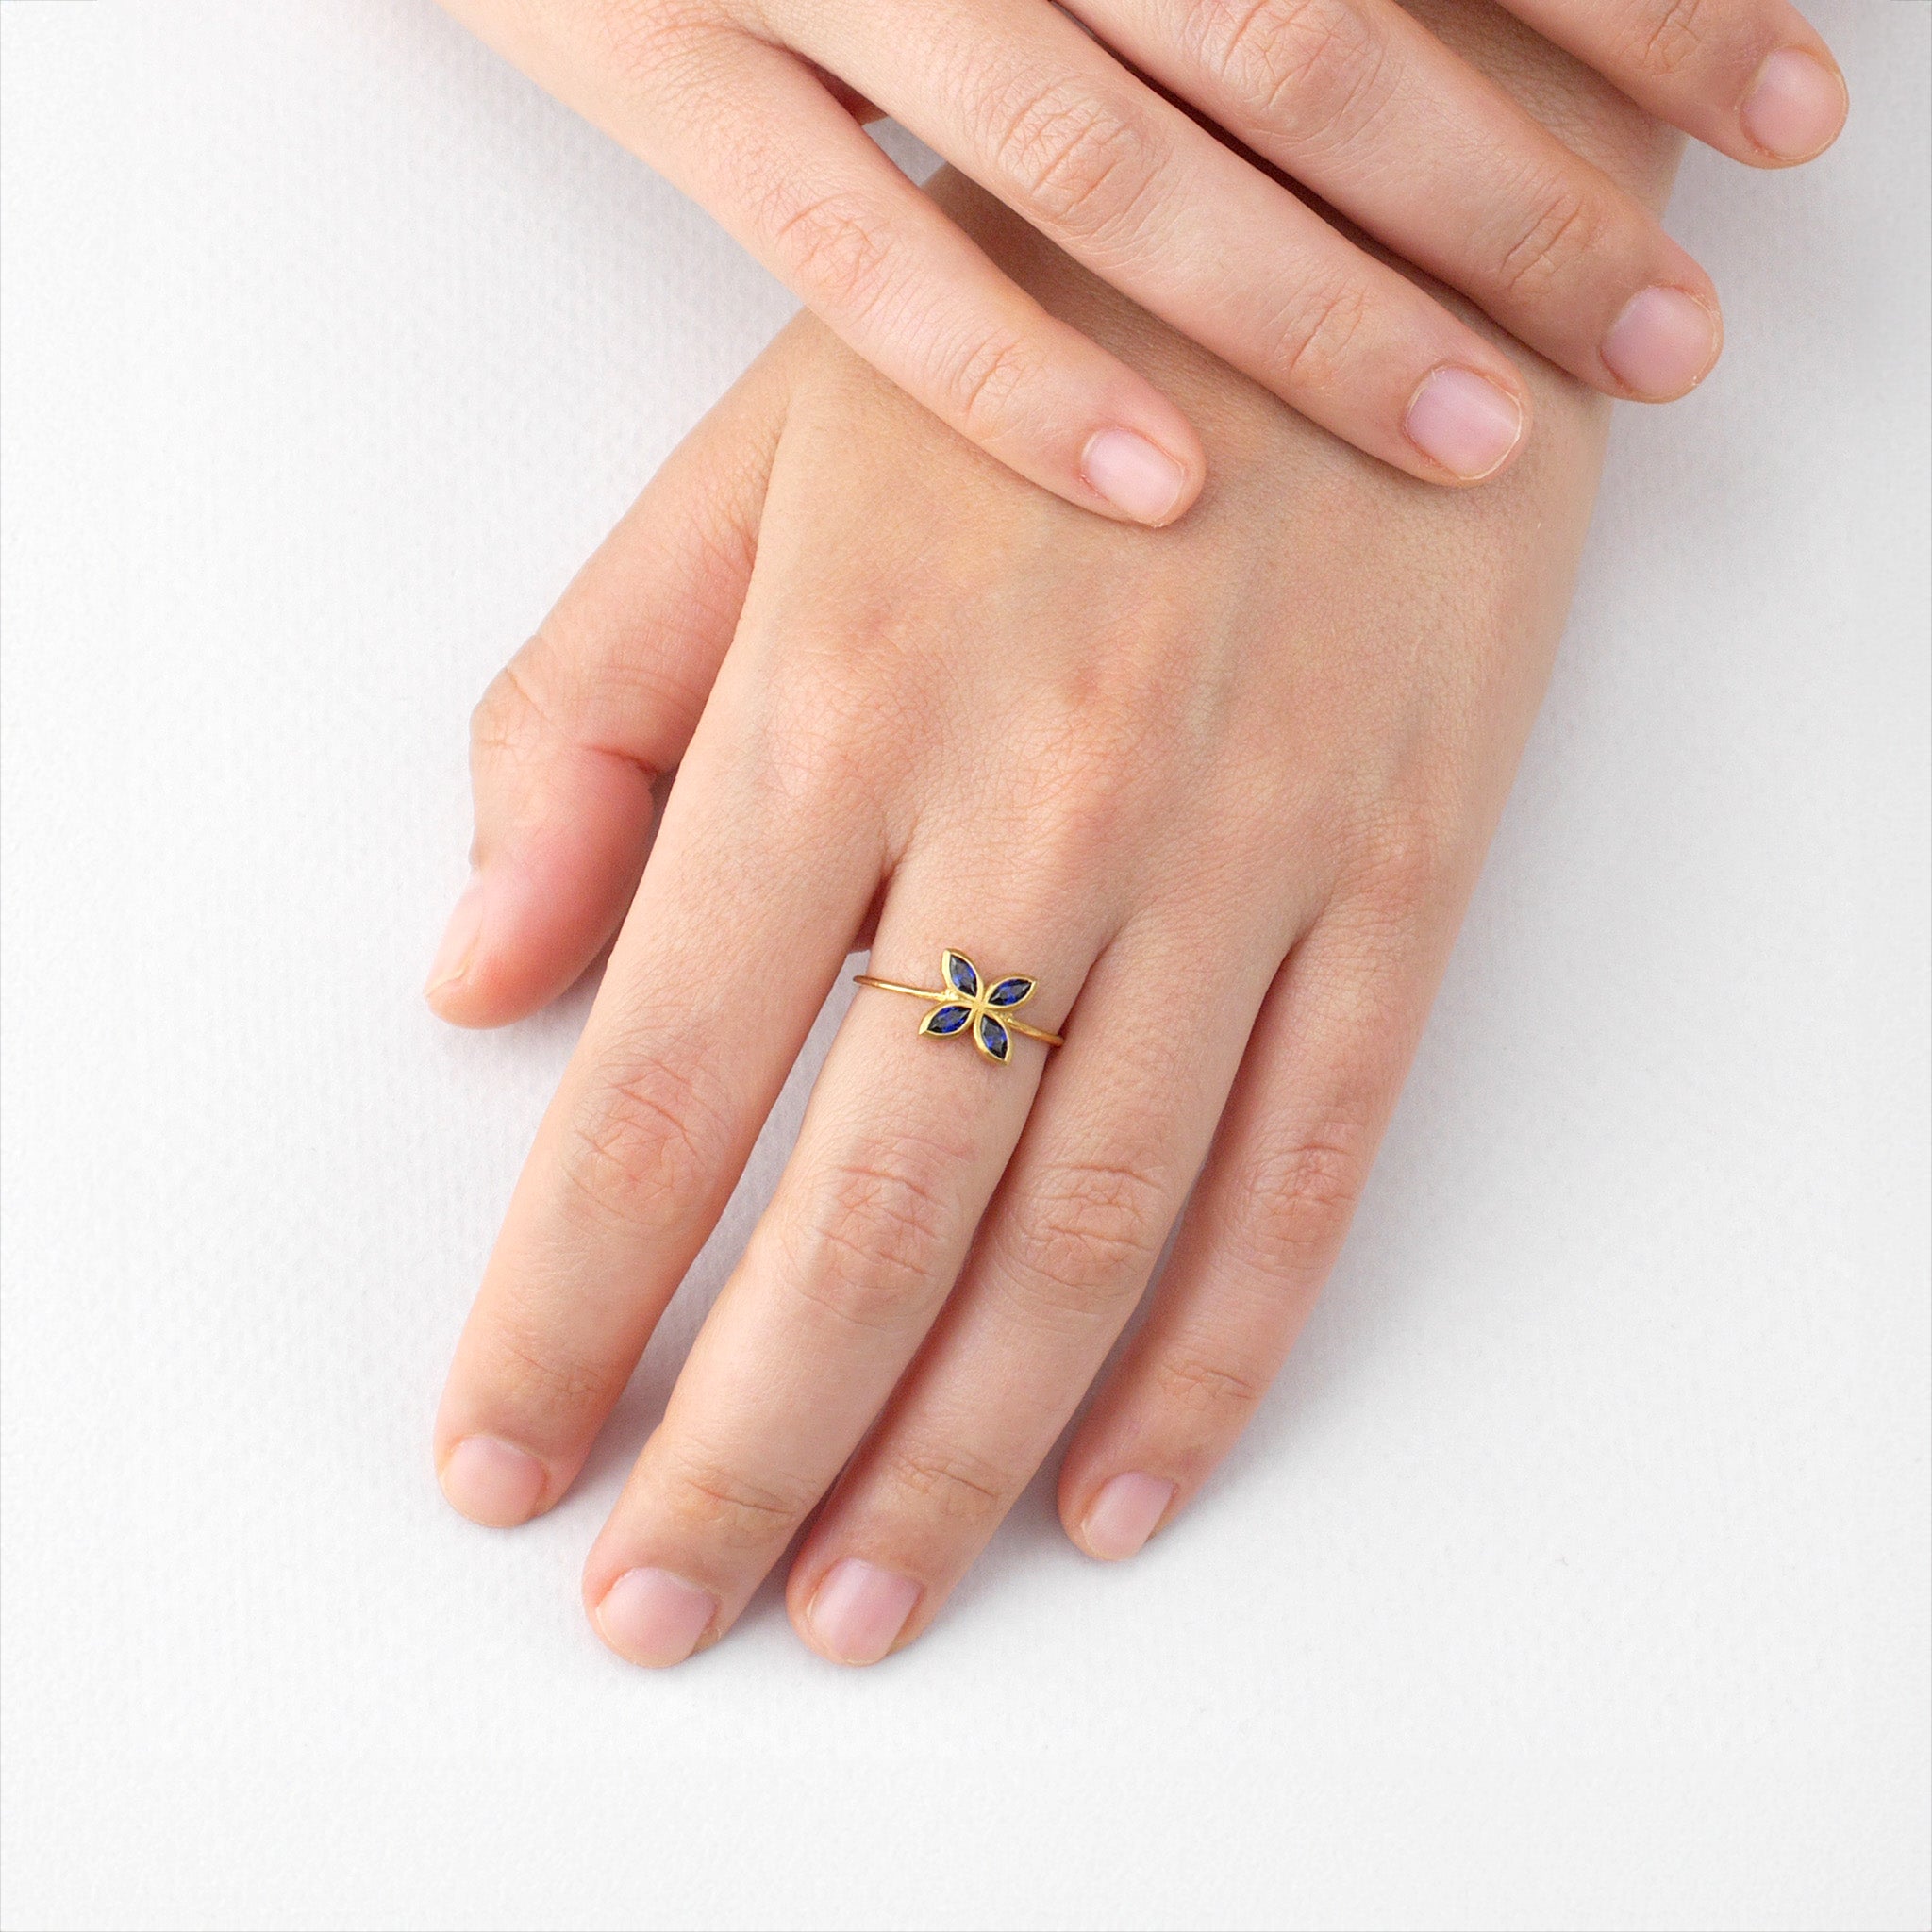 Model wearing the delicate sapphire Marquee Gold ring, its flower-shaped design and radiant color making it a stunning and cheerful accessory for any outfit.